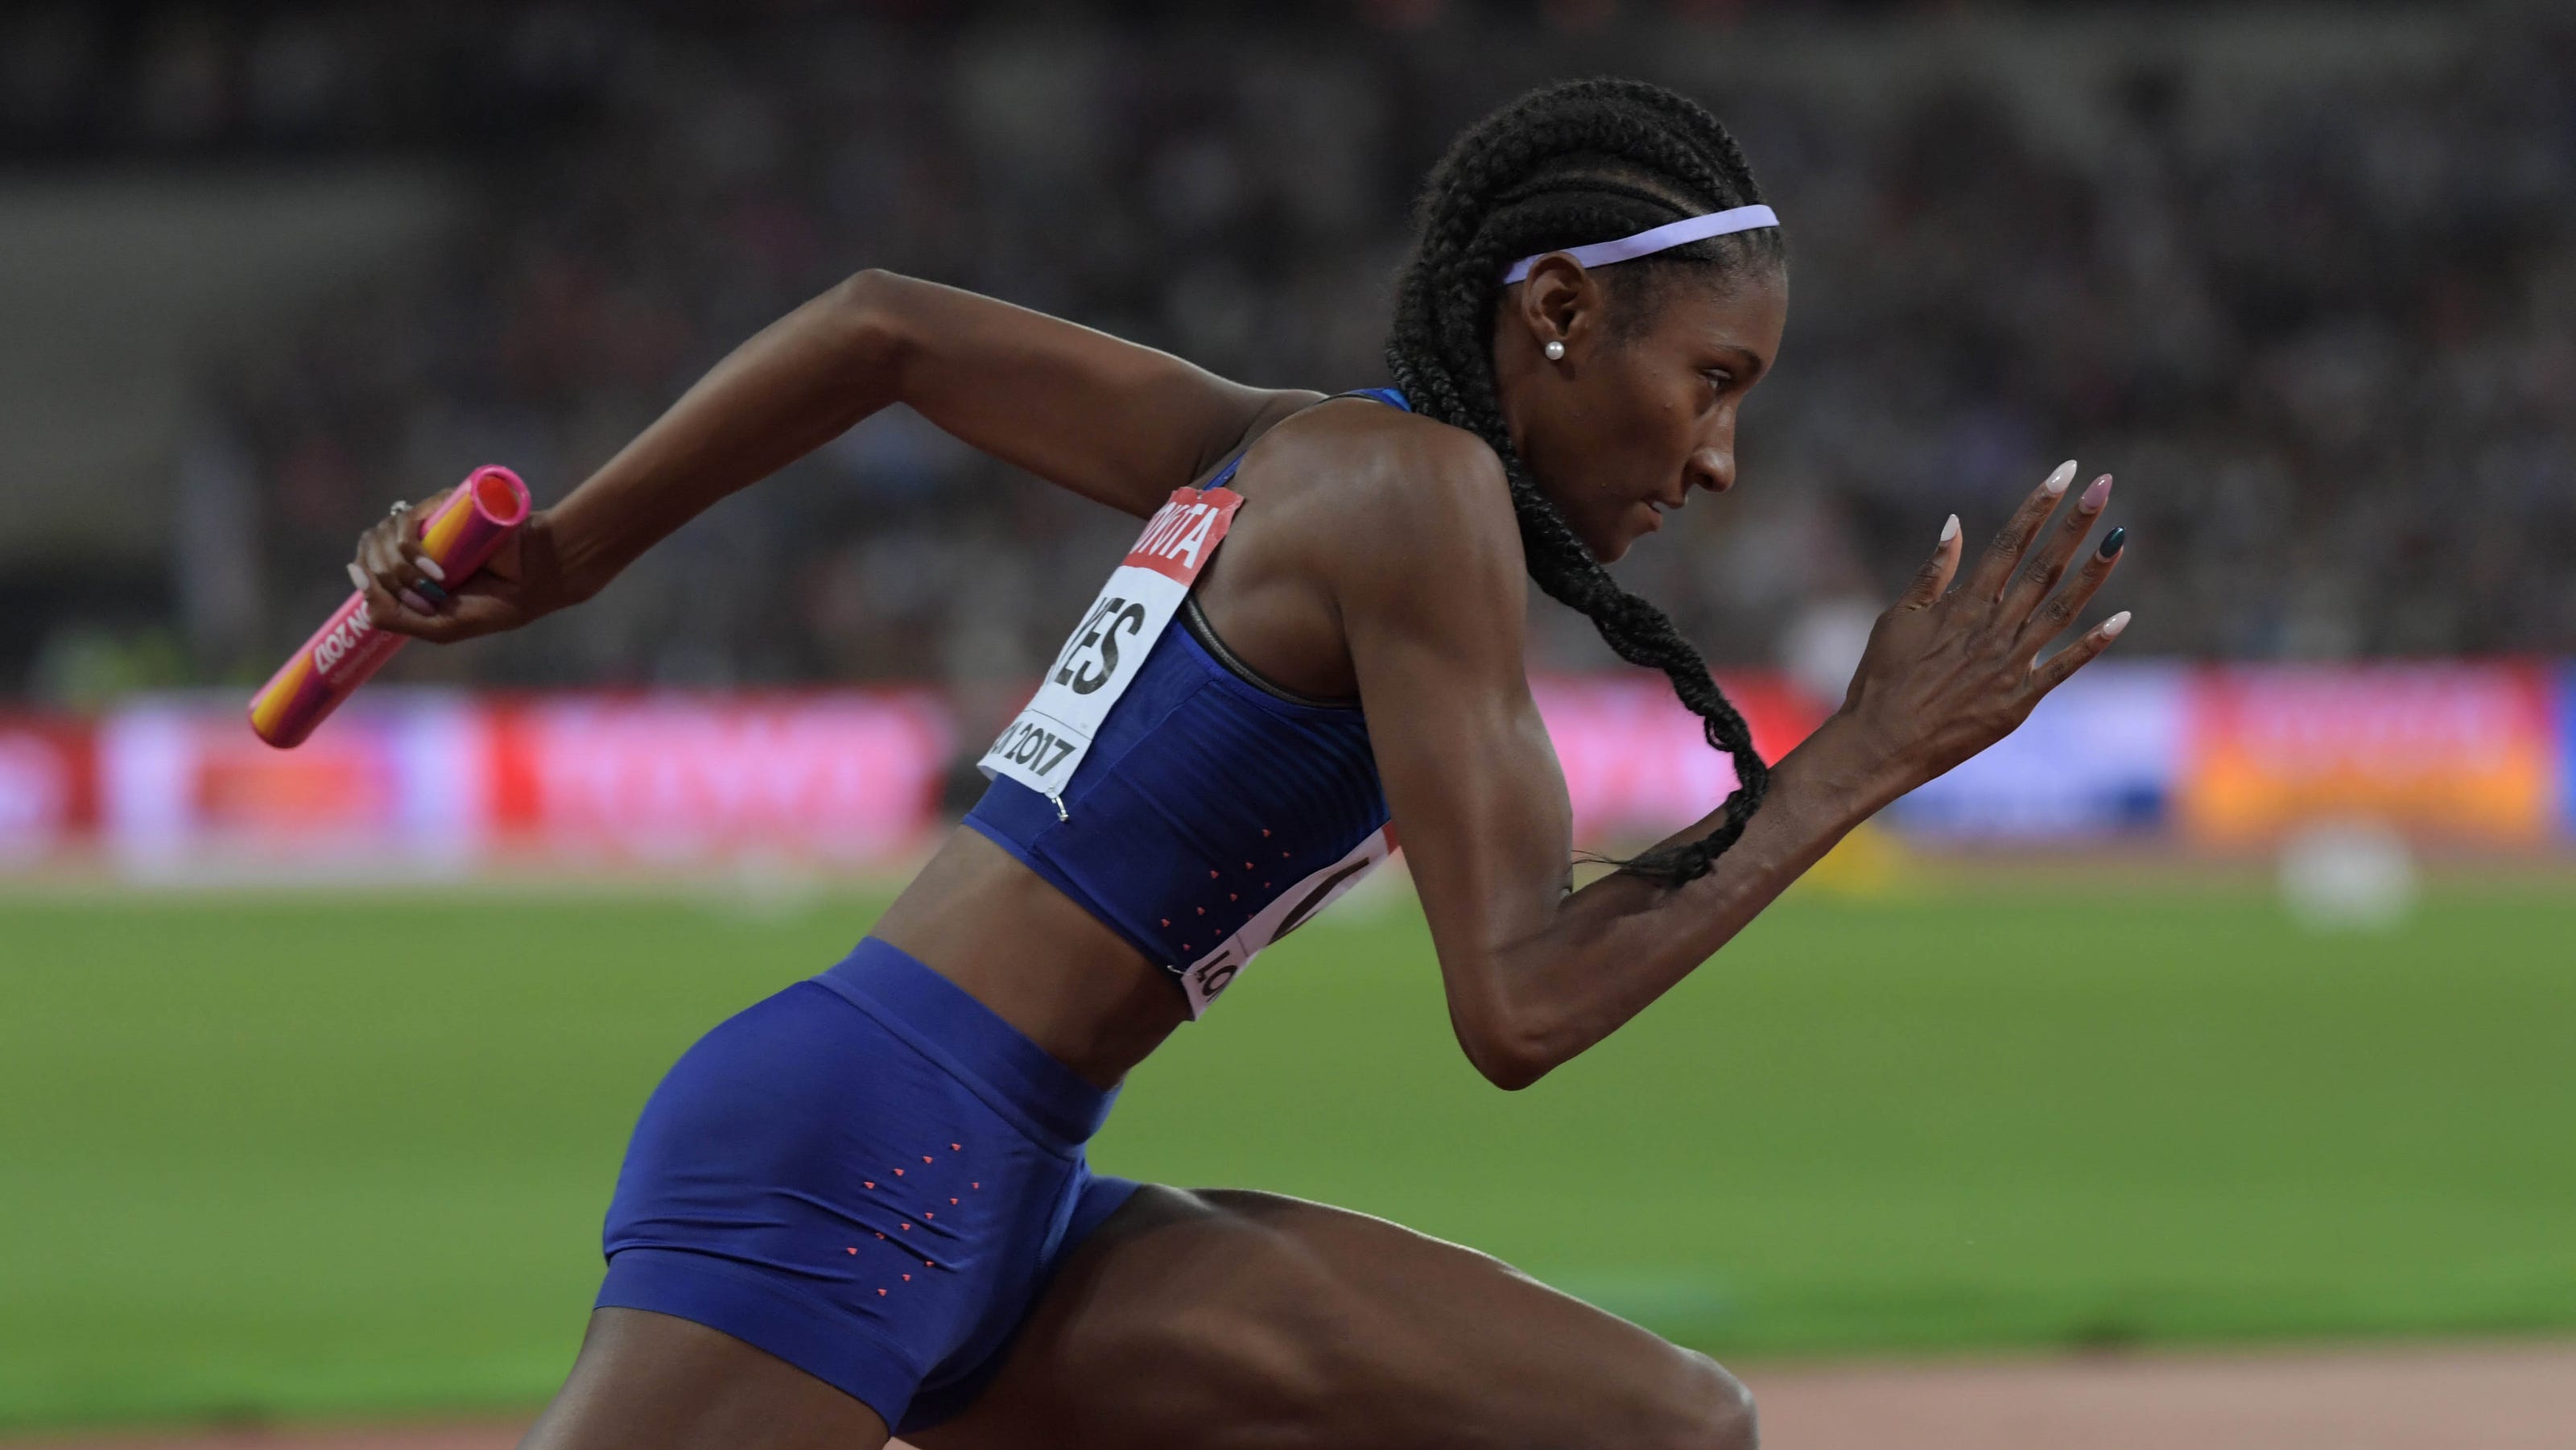   
																Hope Mills' Quanera Hayes makes field for women's 400m finals Tokyo Olympics 
															 